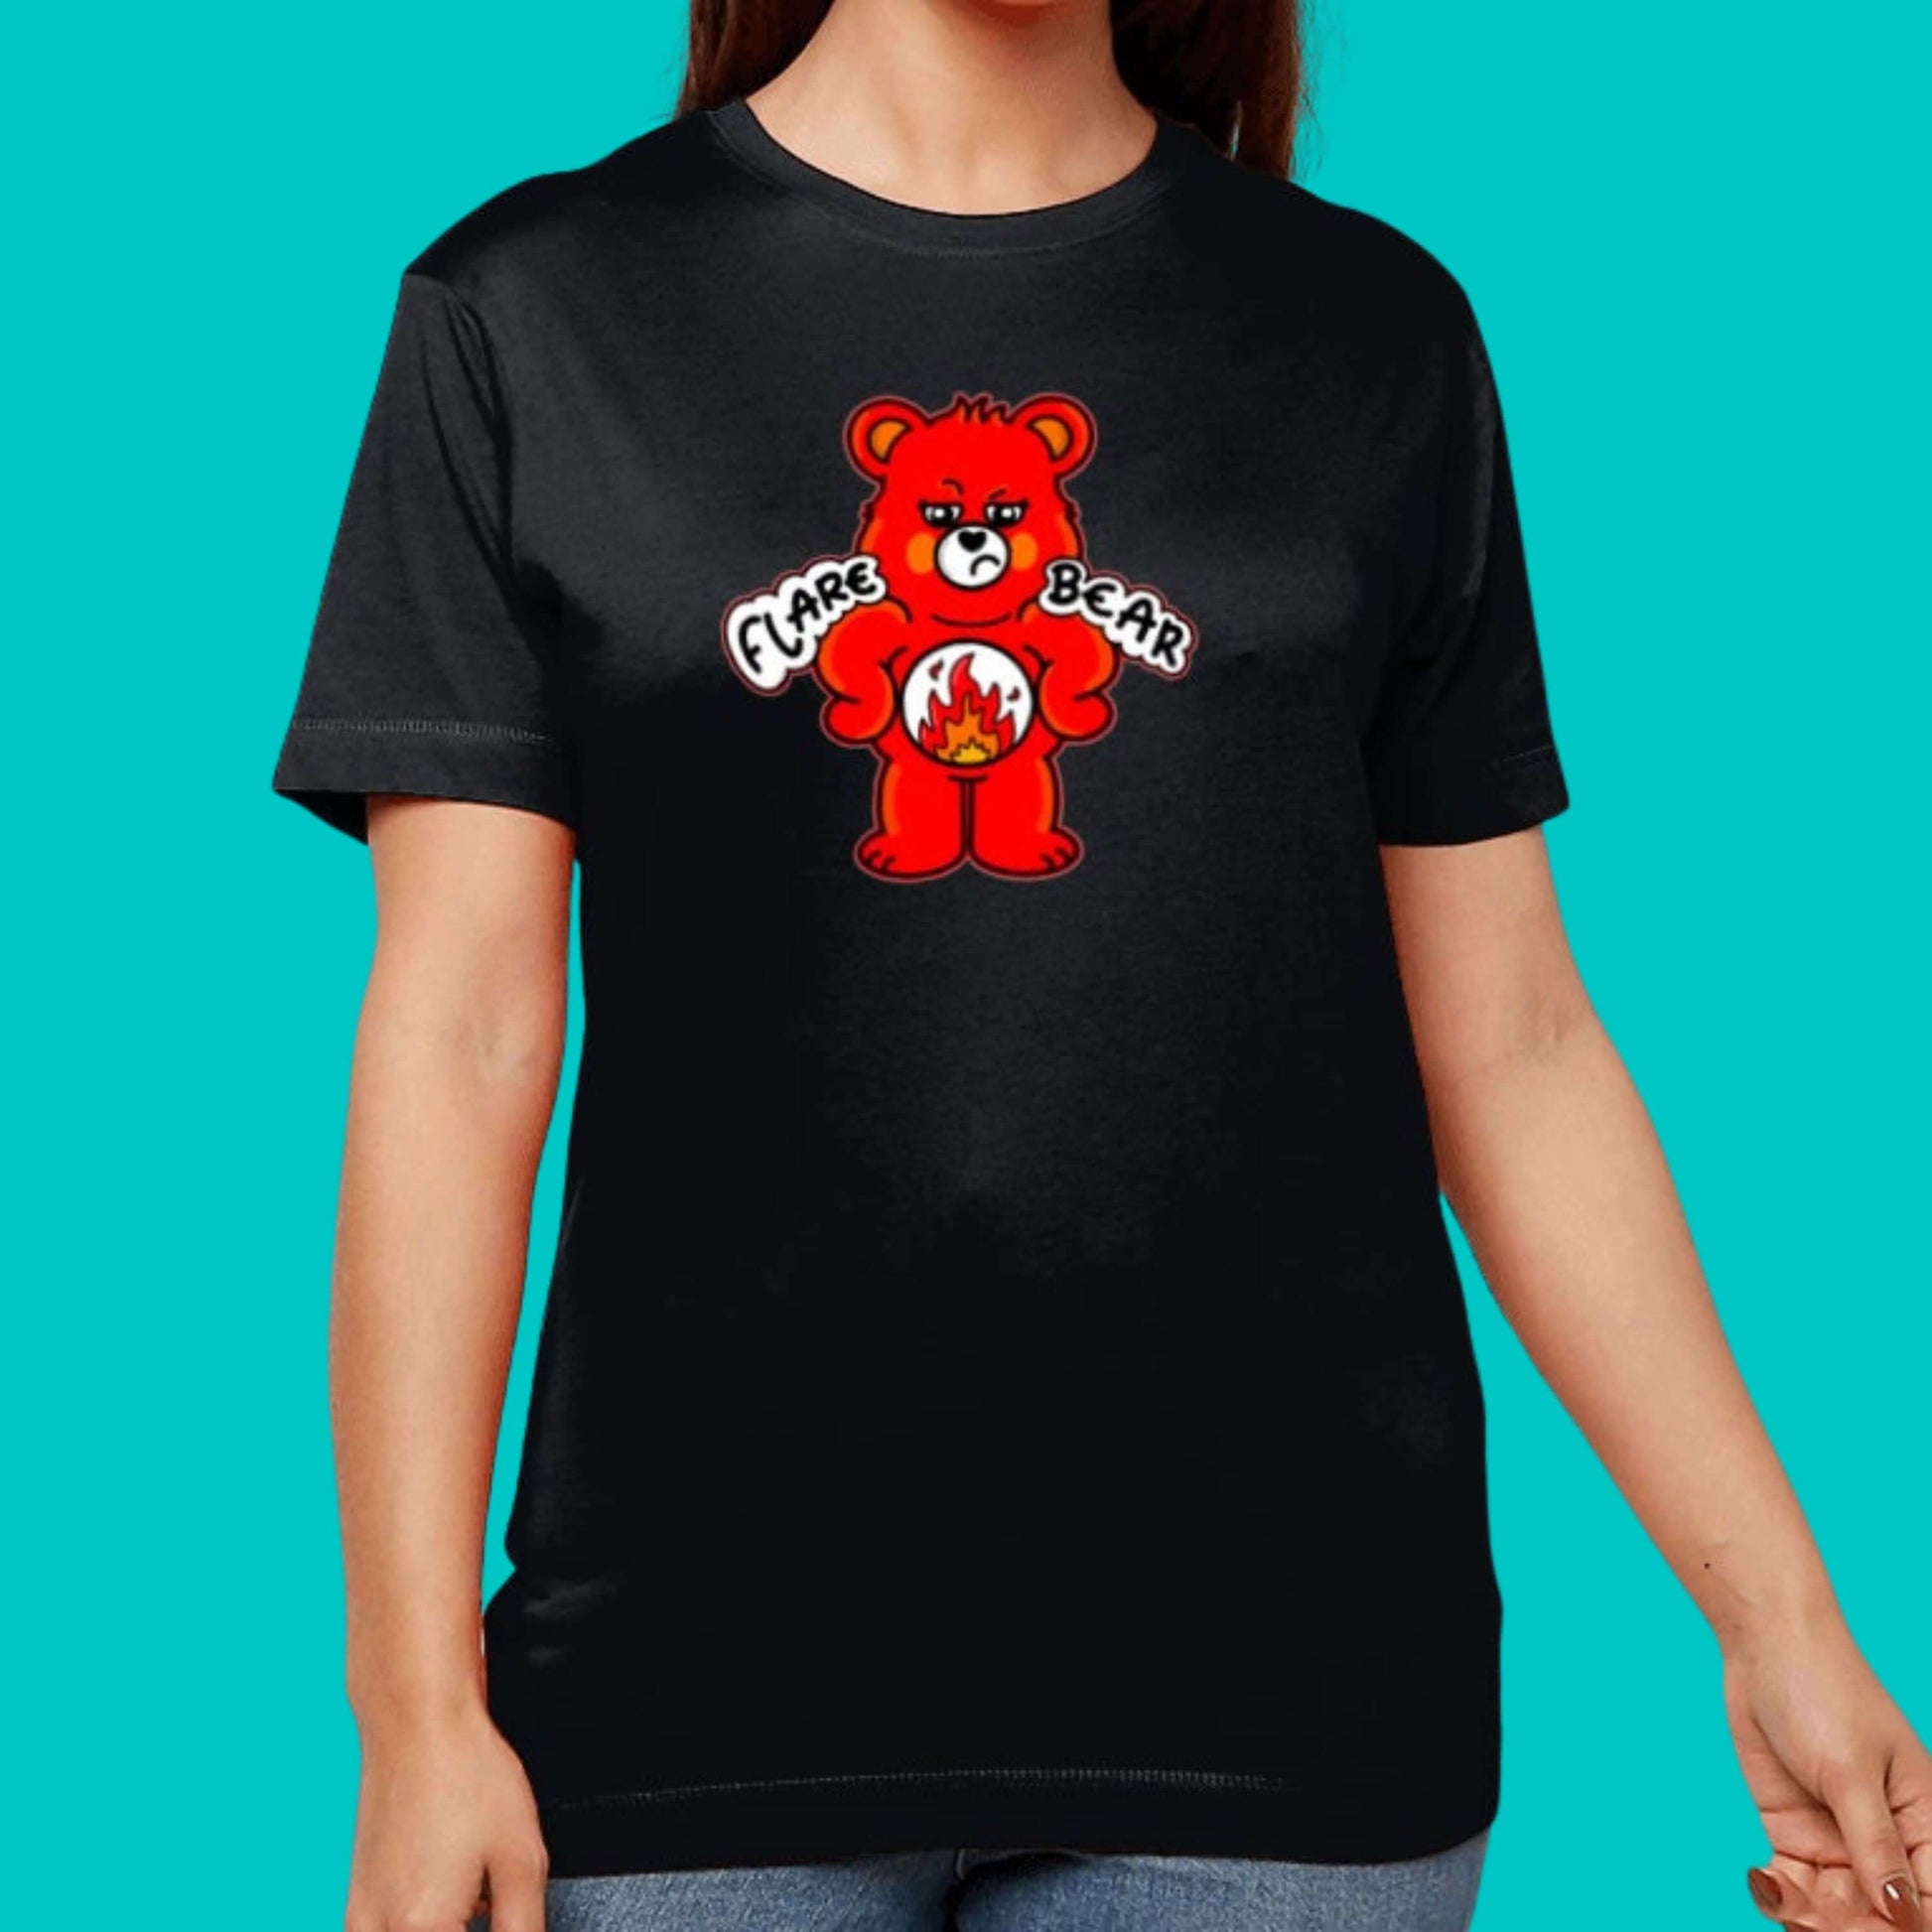 Flare Bear T-shirt being modelled by a femme person on a blue background. The black short sleeve tshirt is of a red bear with a fed up expression and hands on its hips. There is a white circle on its belly with flames inside. Flare Bear is written on the middle. The tshirt is designed to raise awareness for chronic illness flare ups.